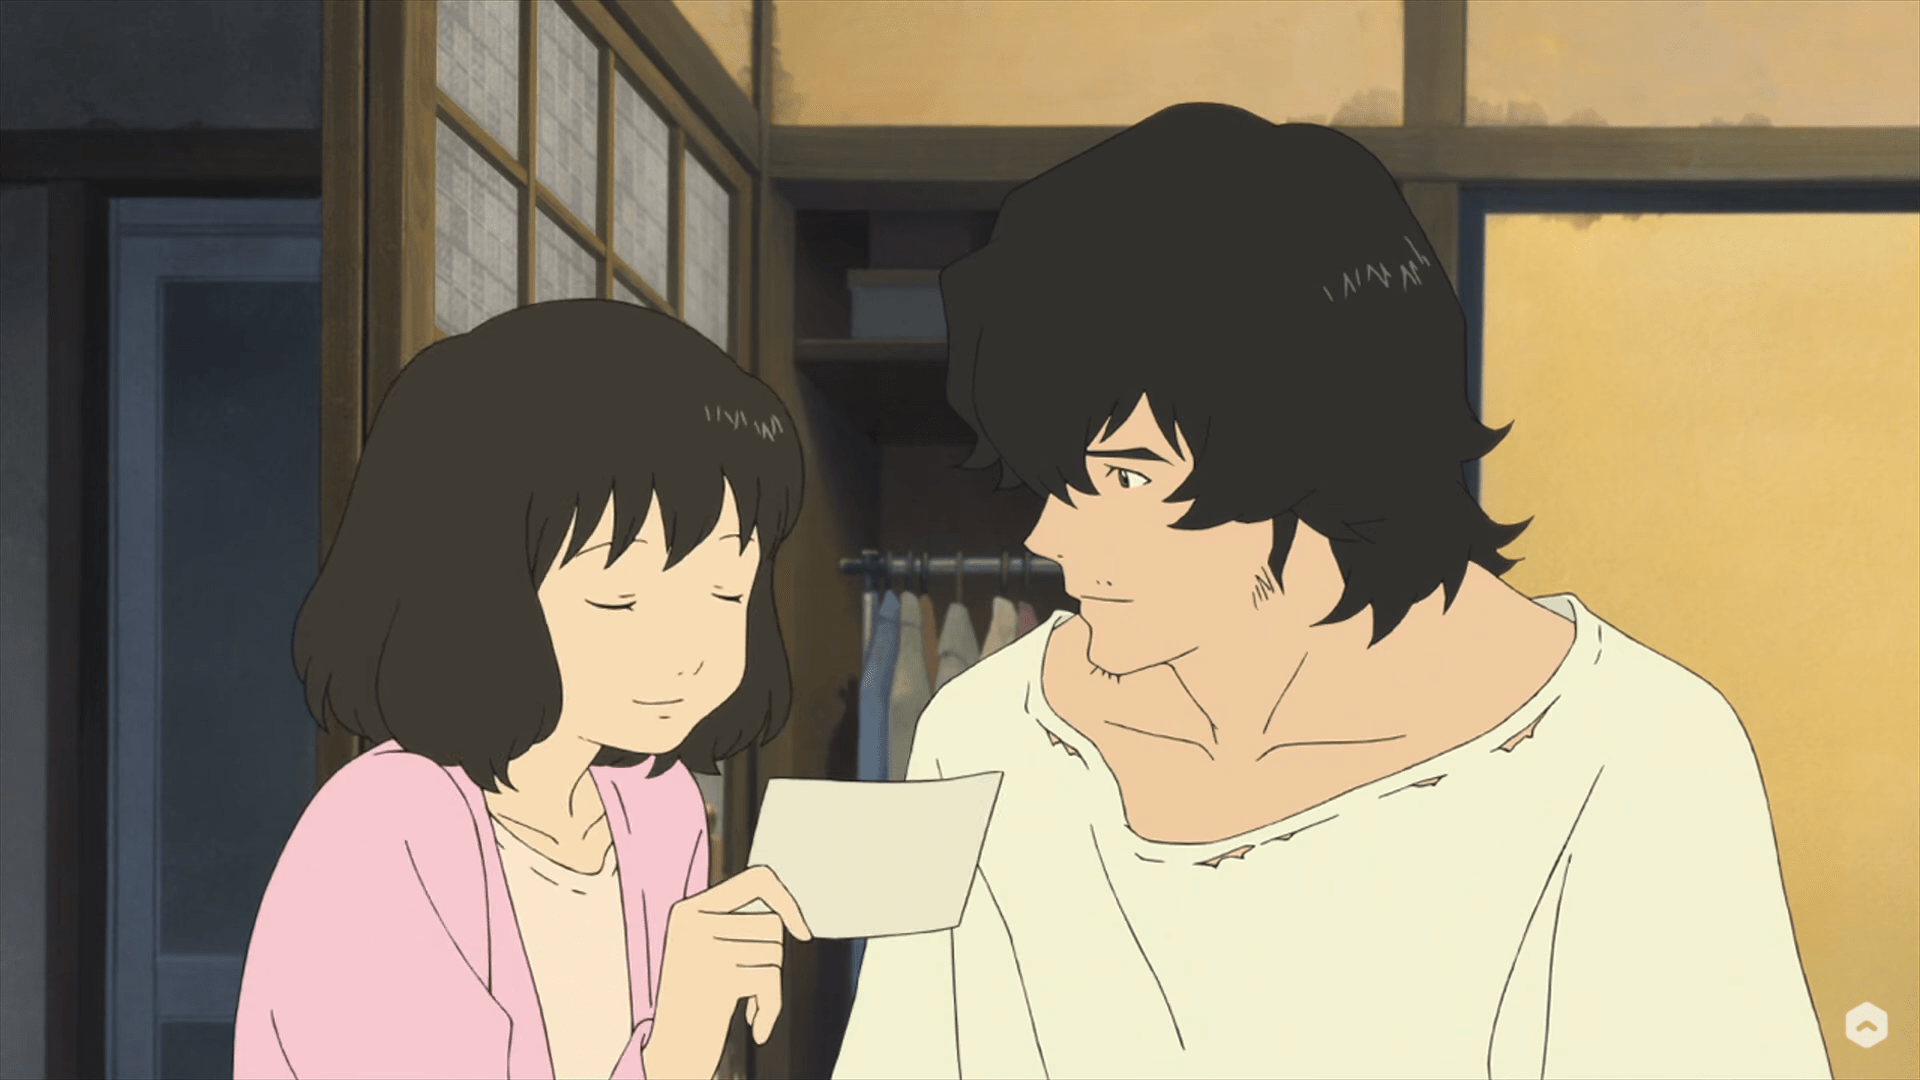 Hana shares a moment with her partner in Wolf Children